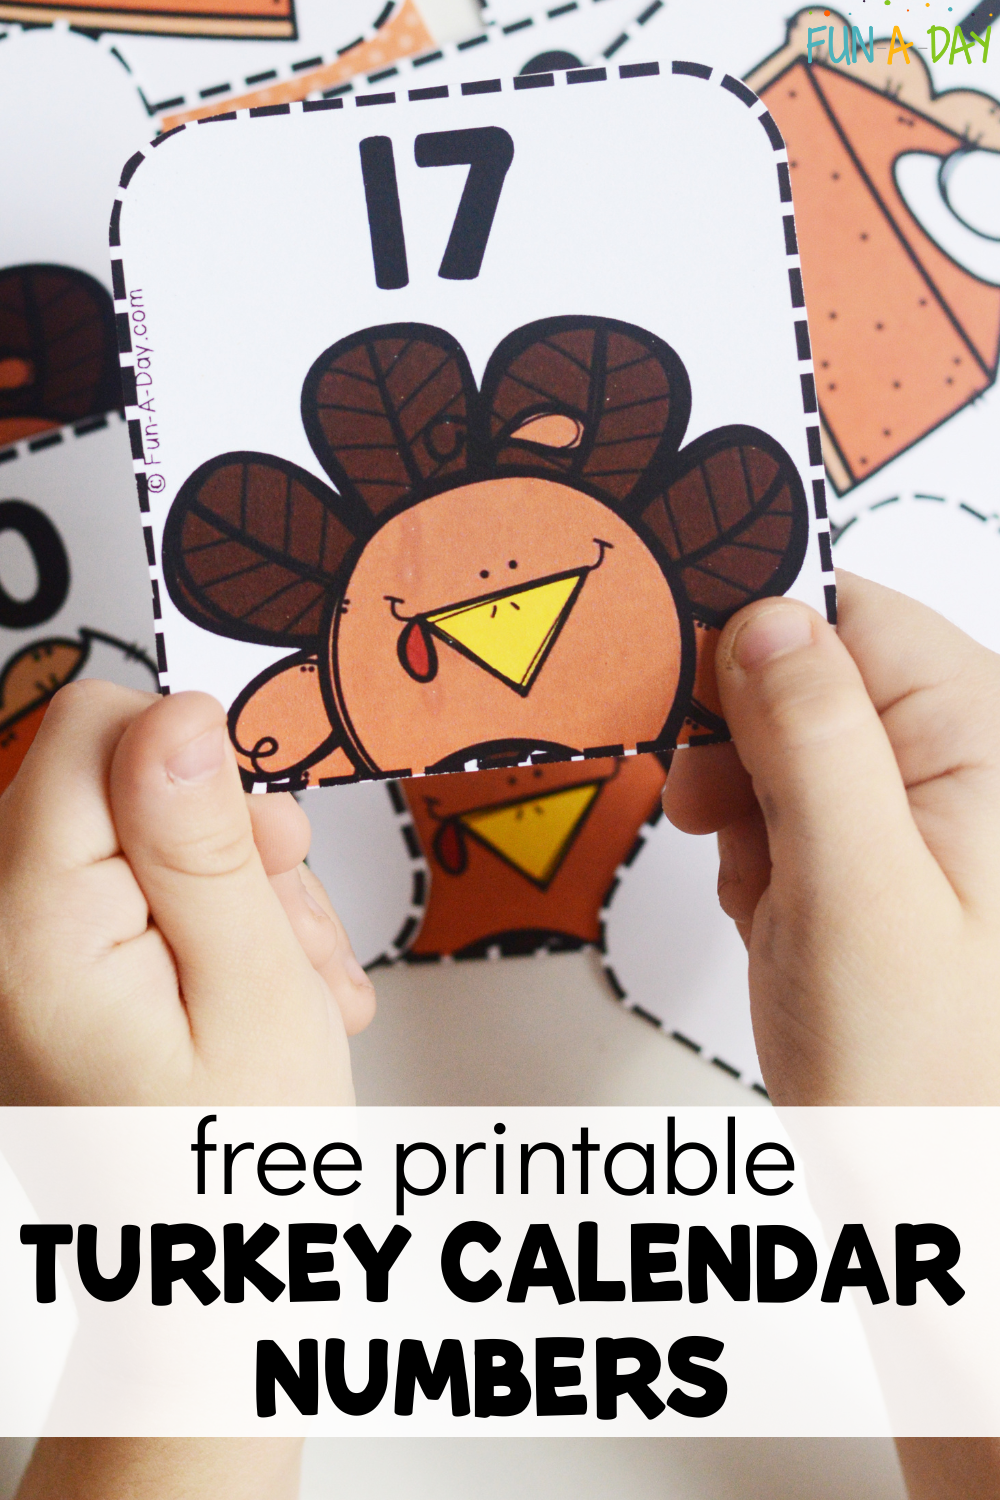 child holding number 17 with text that reads free printable turkey calendar numbers